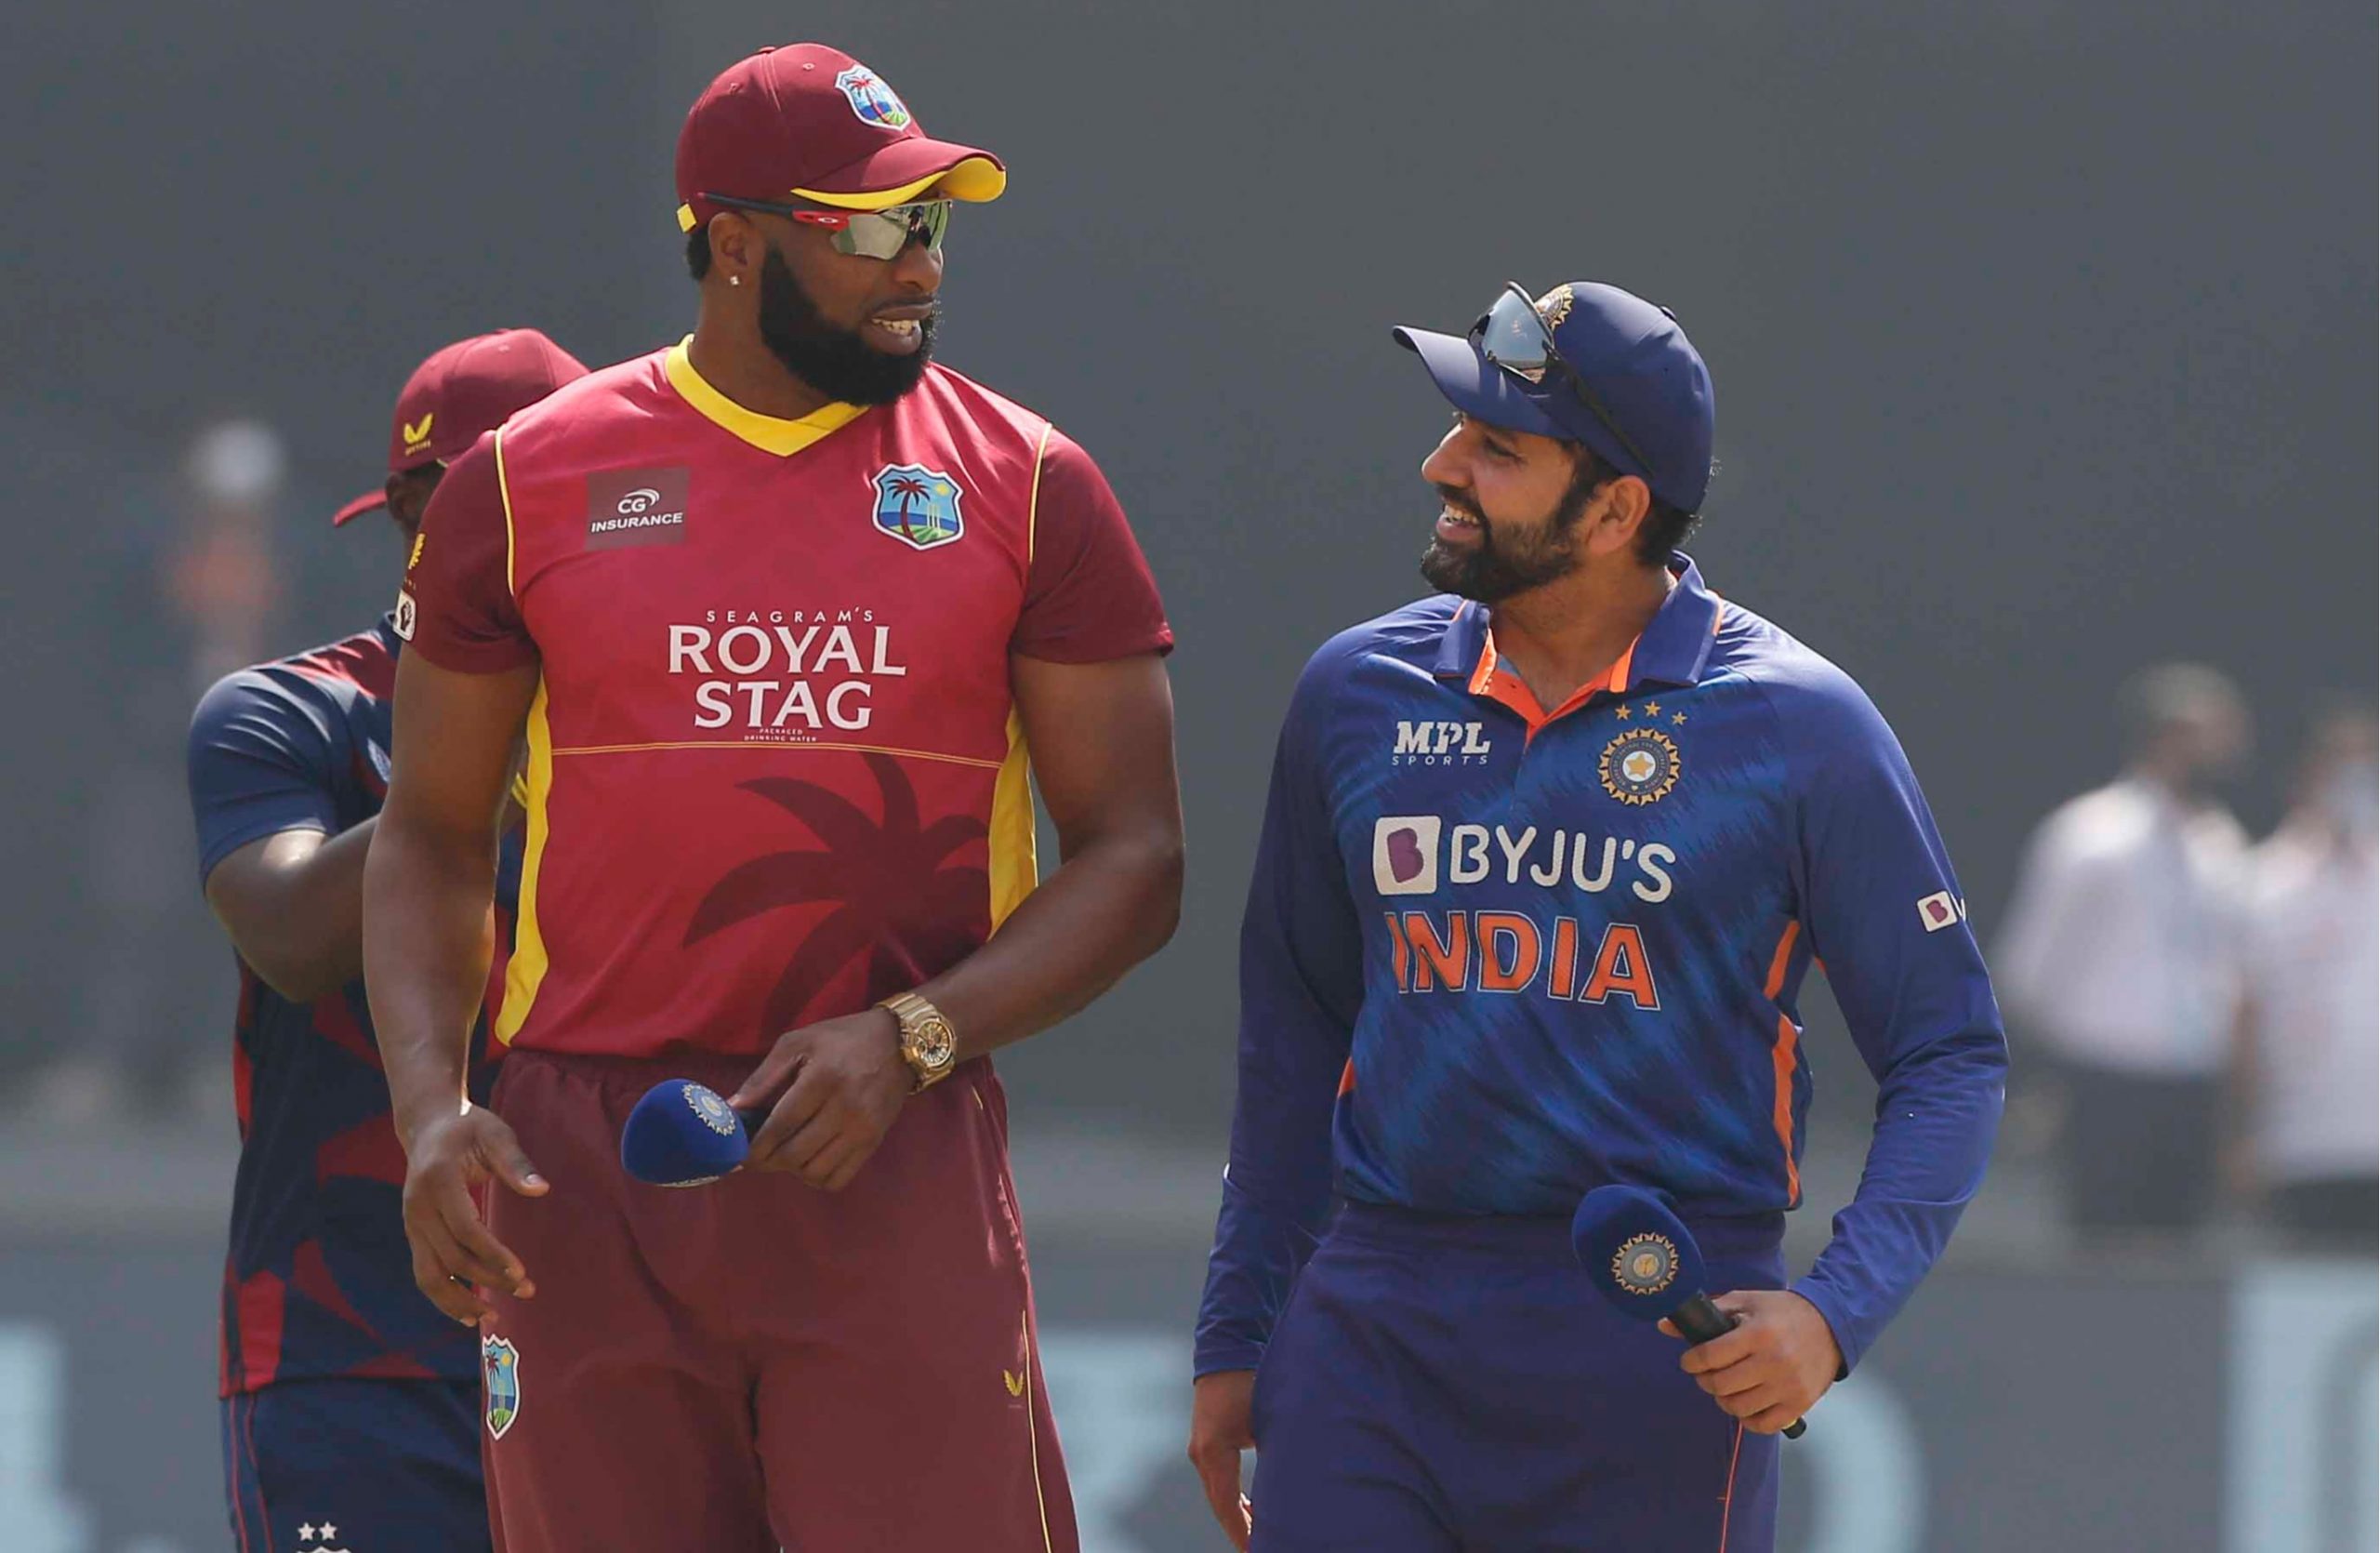 IND vs WI 2022: 1st T20I – When And Where To Watch The Match Live?